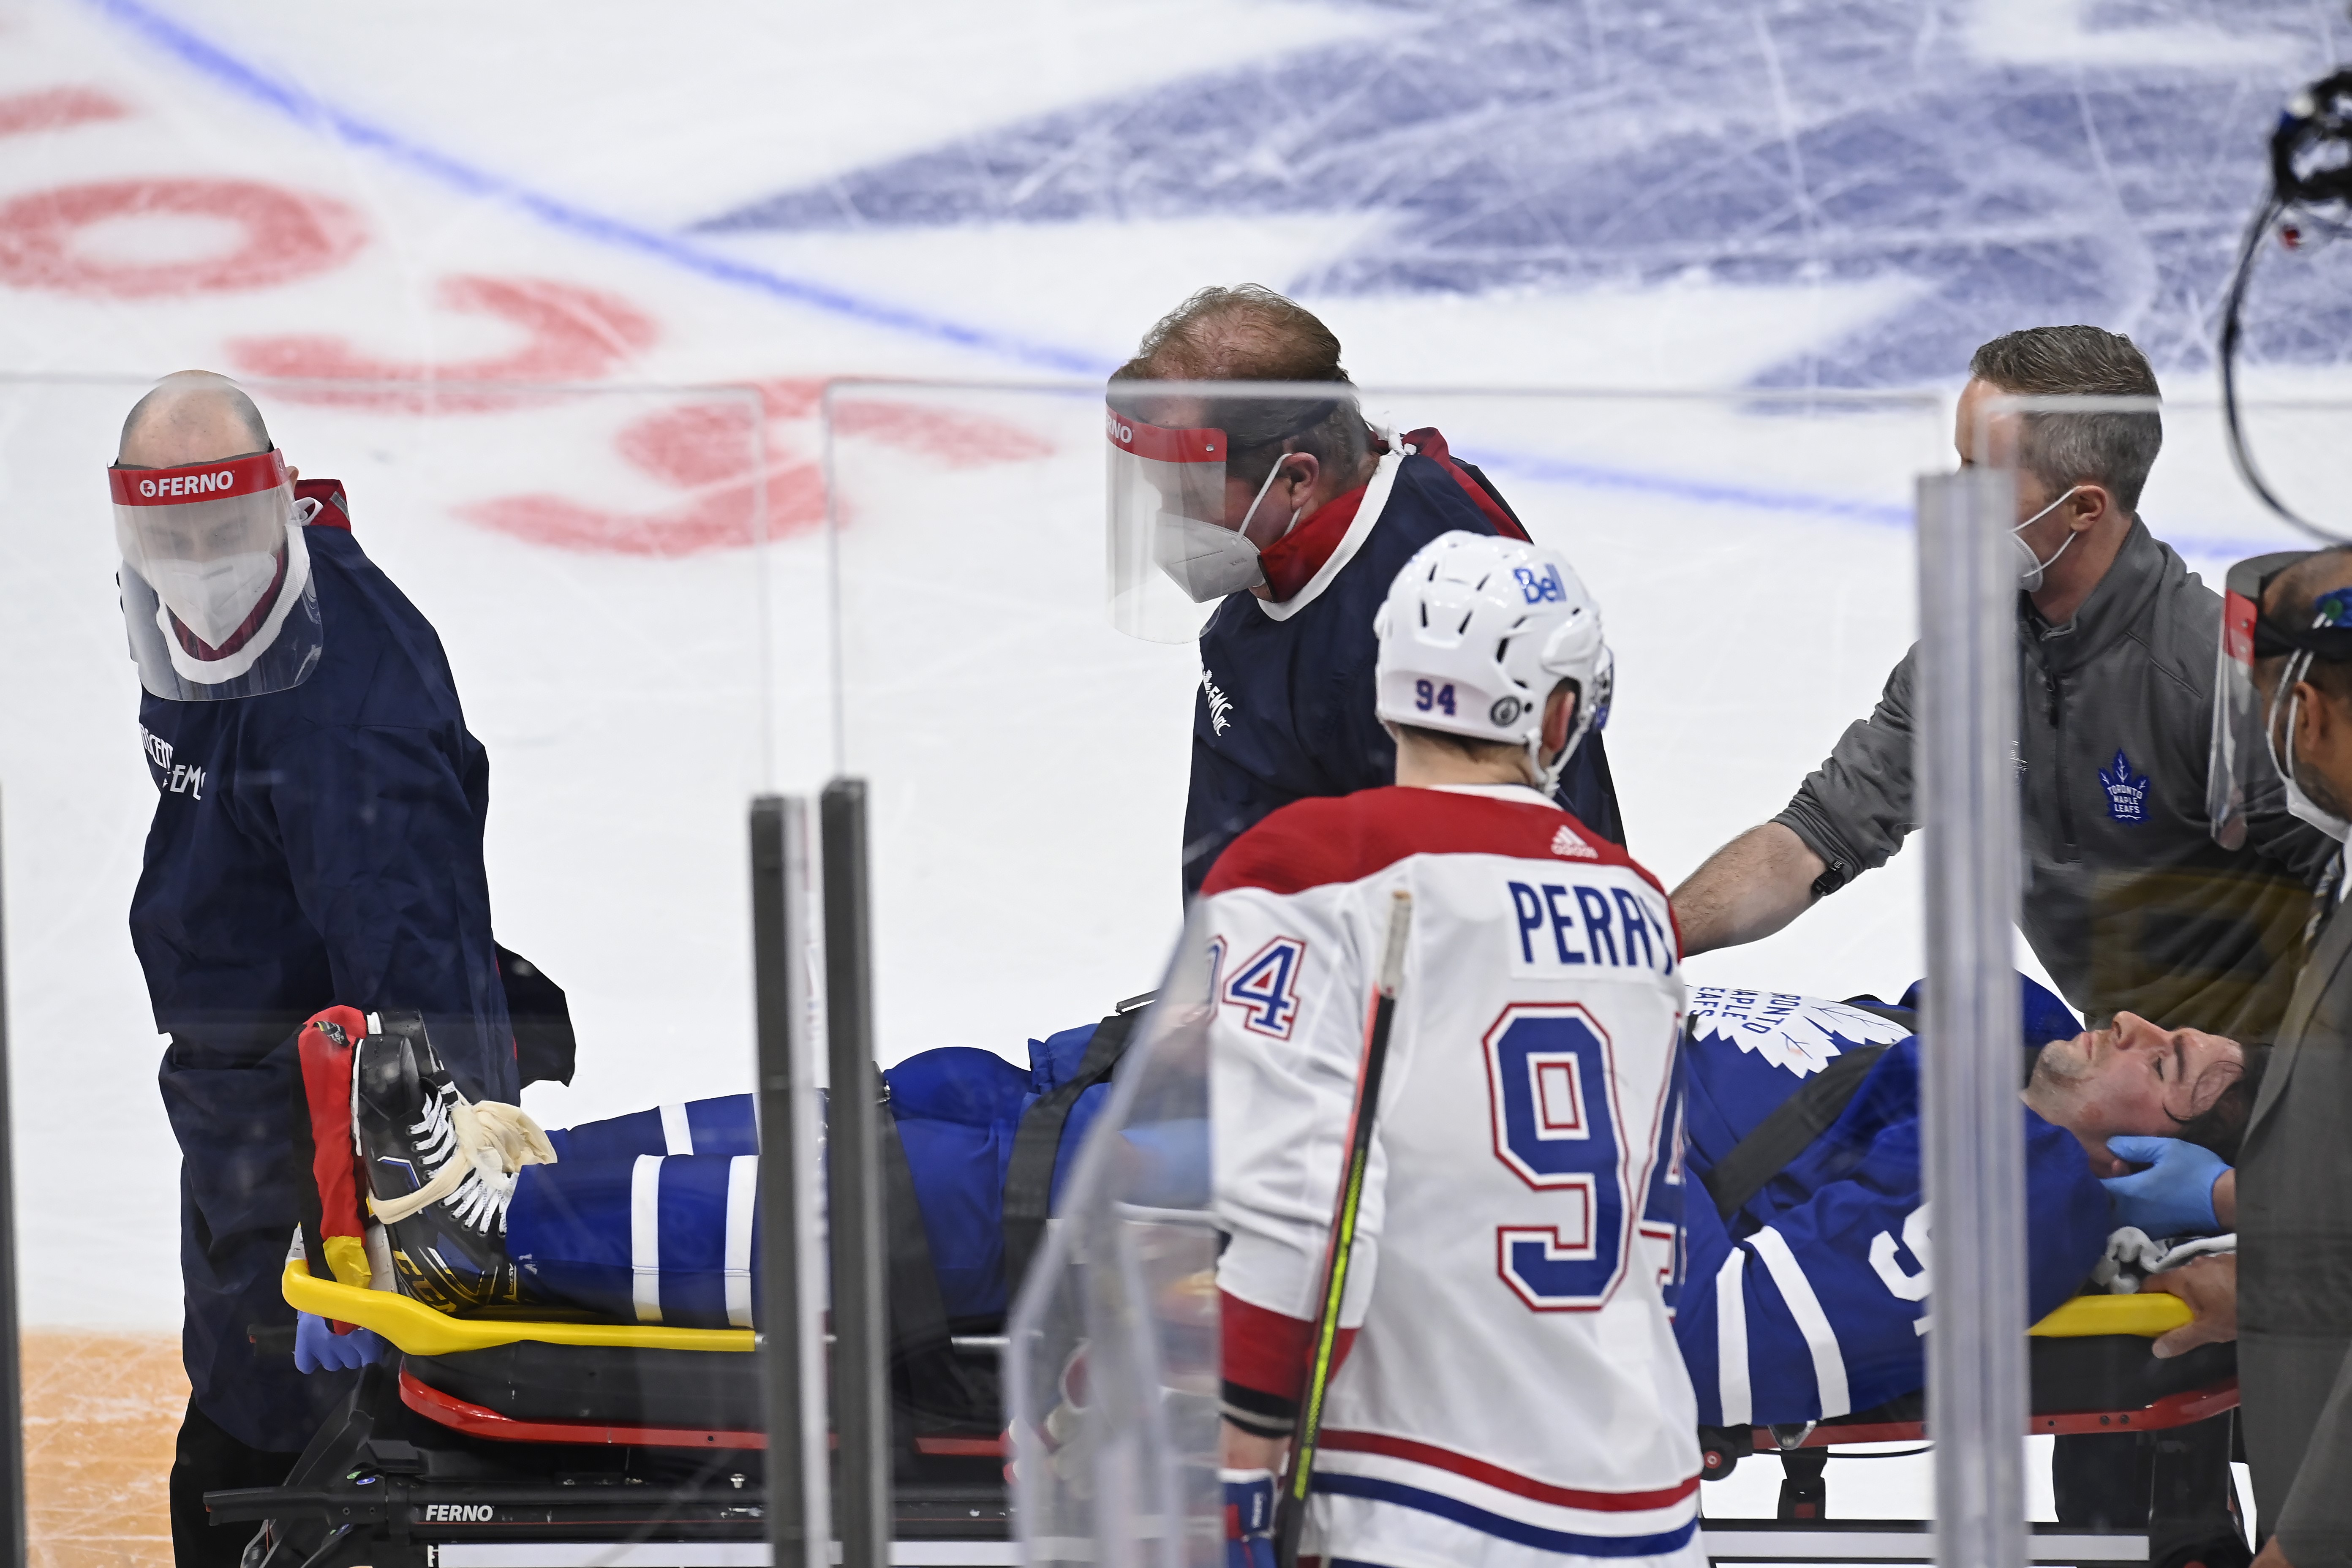 After Maple Leafs' John Tavares injured, Nick Foligno fights Canadiens'  Corey Perry; Twitter asks why